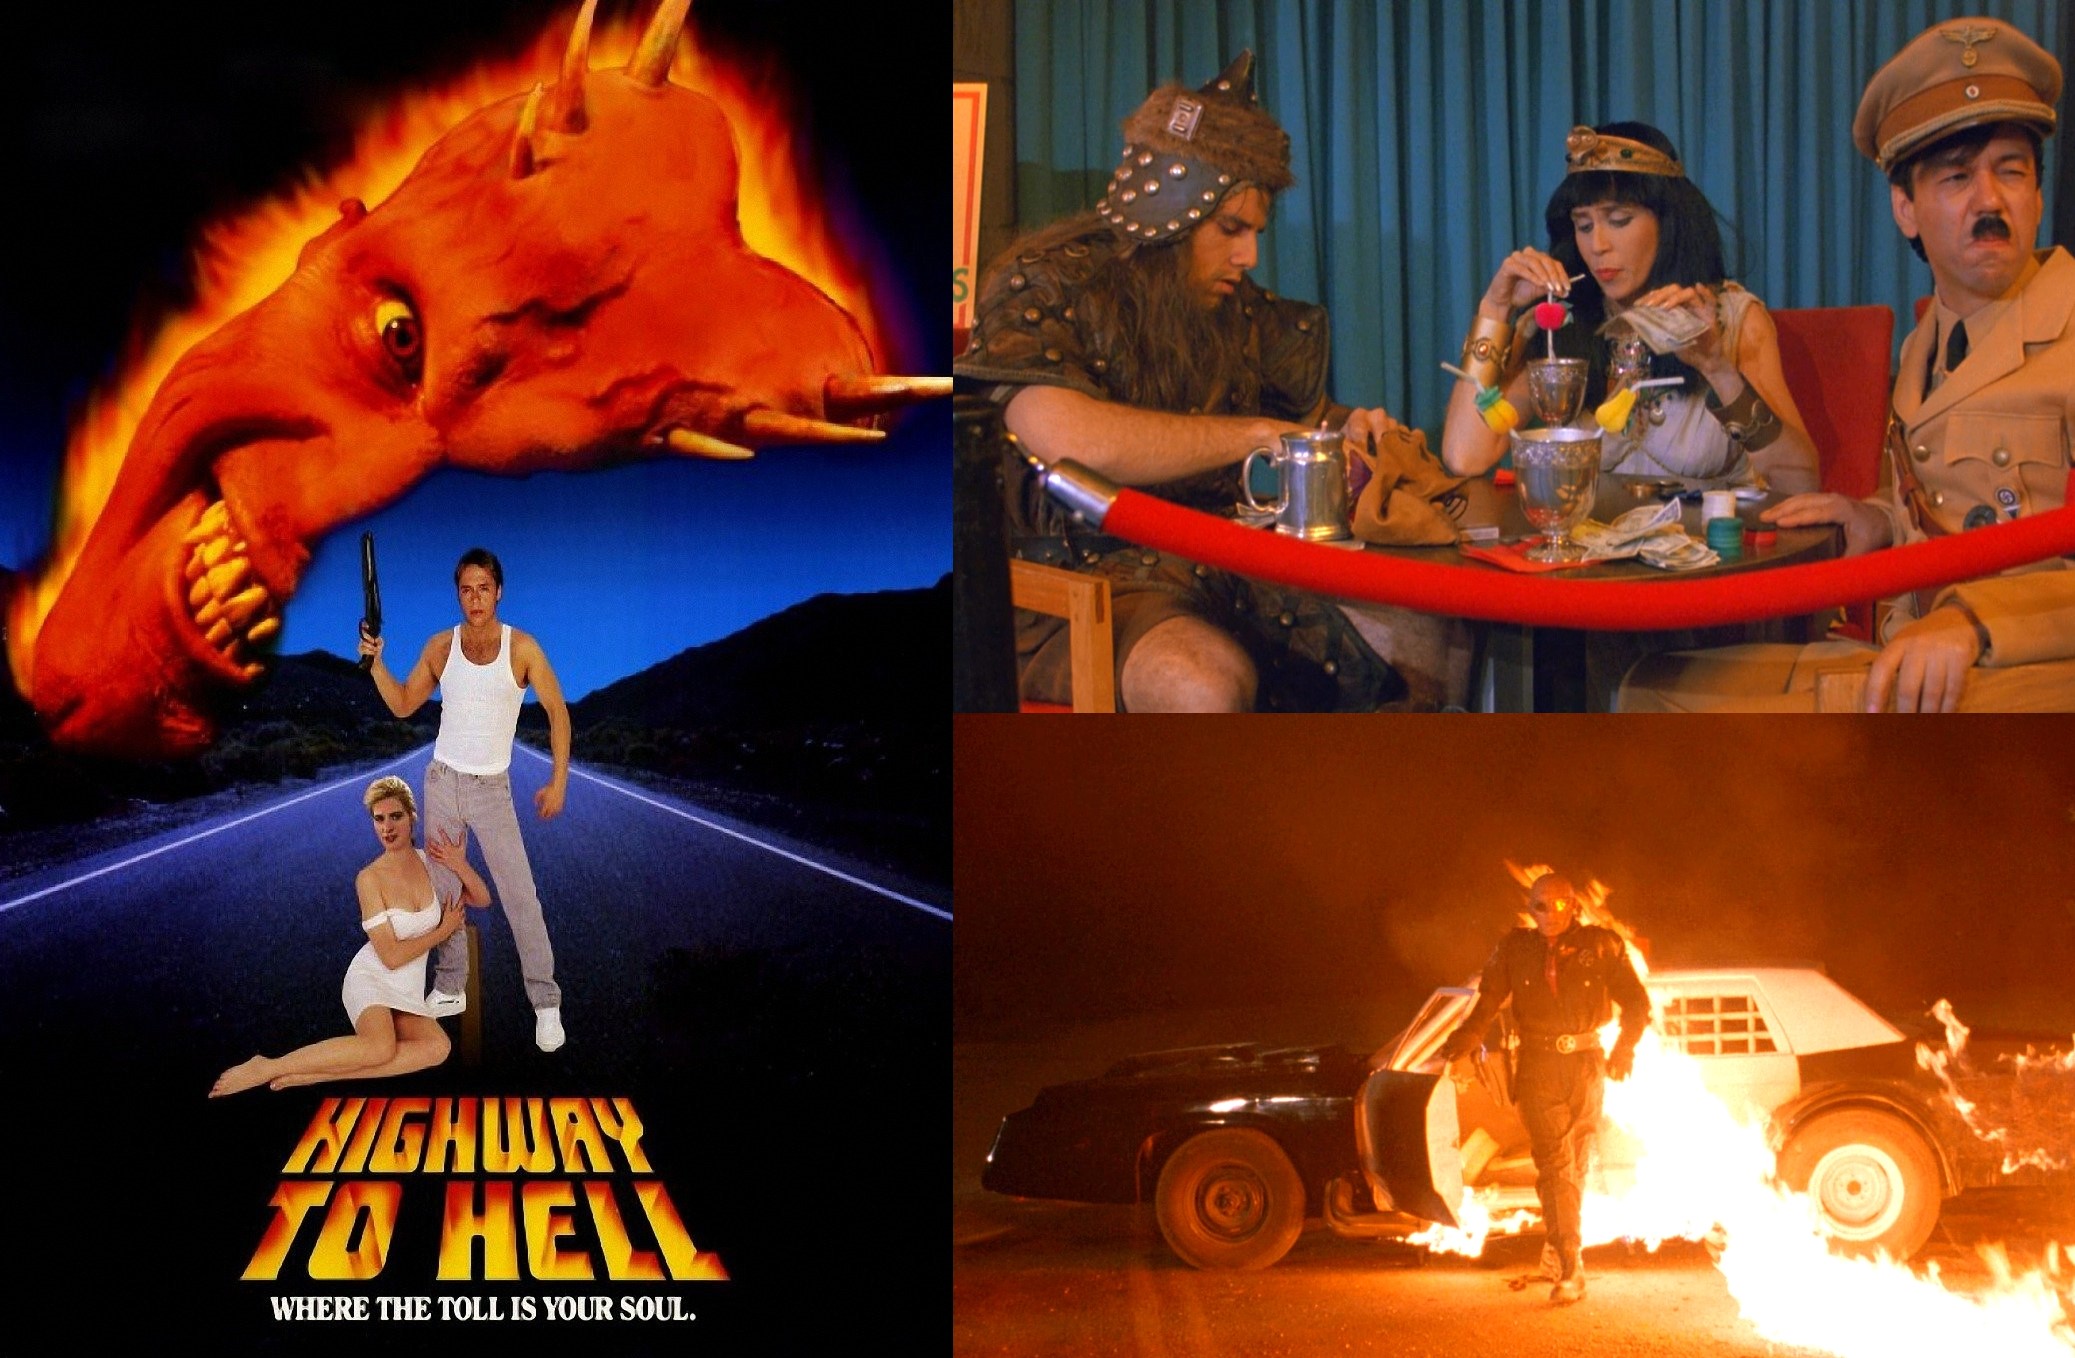 highway to hell movie reviews